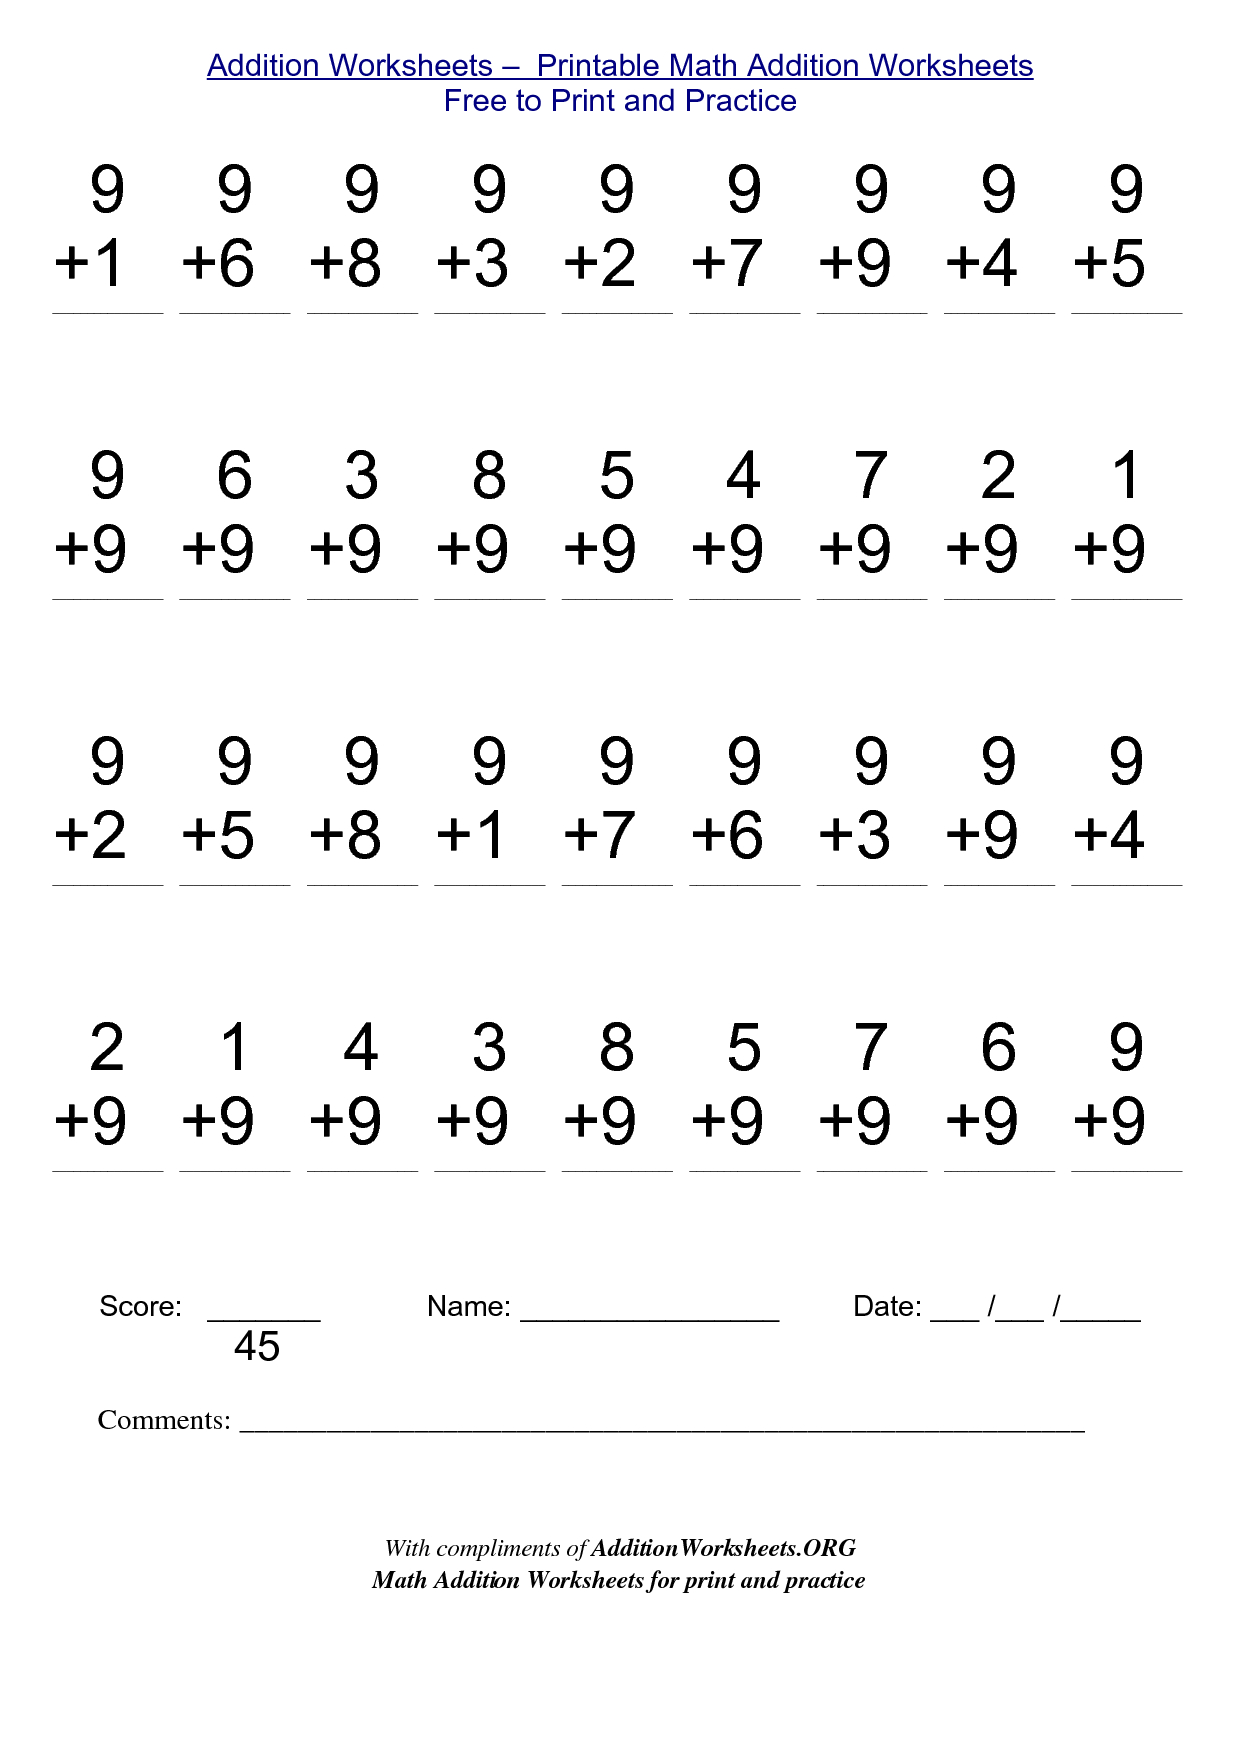 Math Worksheets For Free To Print - Alot | Me | Math Worksheets - Free Printable Math Worksheets For 2Nd Grade